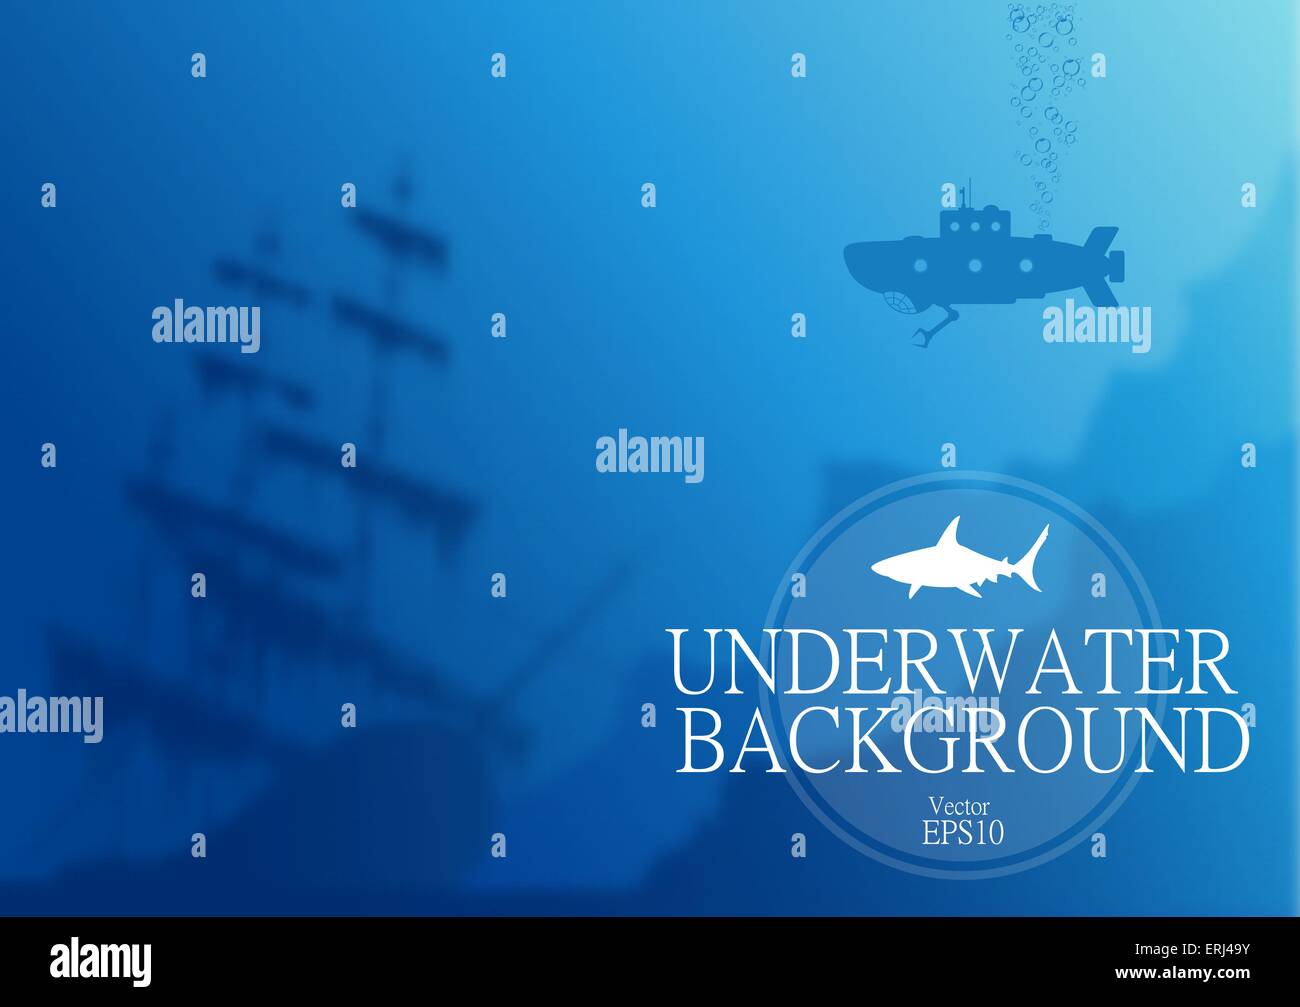 Blurred underwater background with old ship and submarine silhouette. Vector illustration EPS 10. Stock Vector